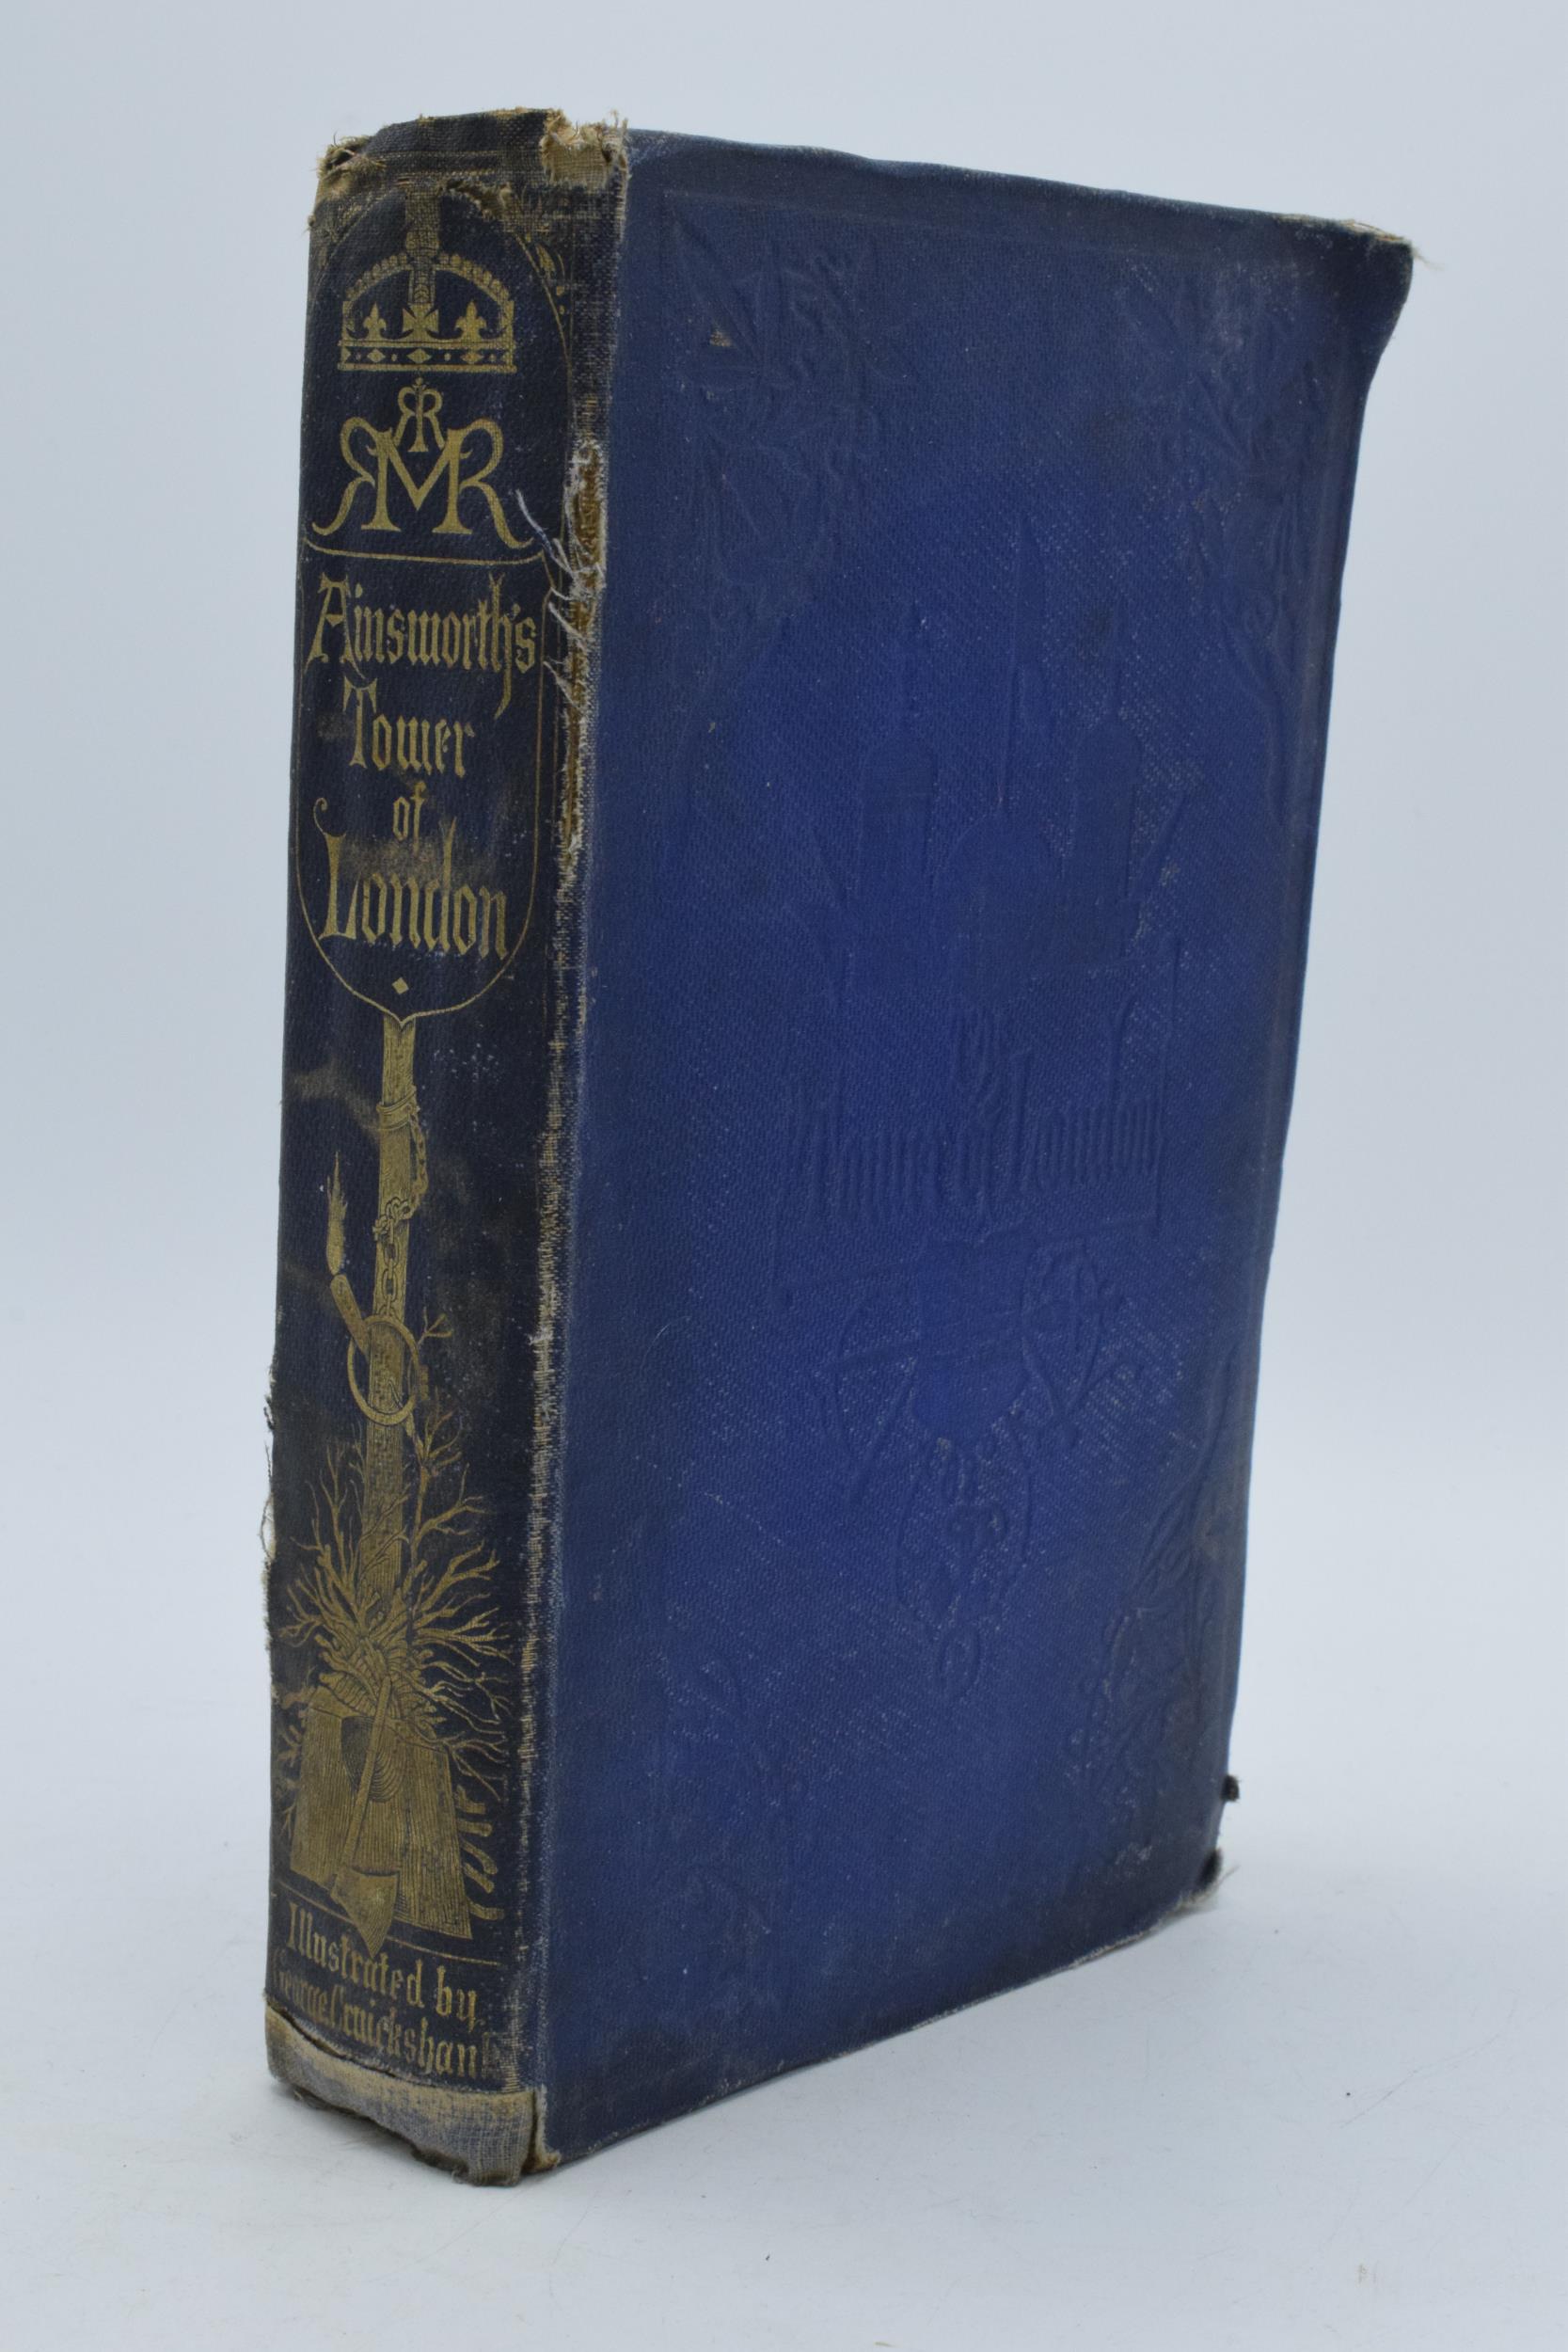 'Ainsworth's Tower of London' hardback book by William Harrison Ainsworth, 1854. Text generally